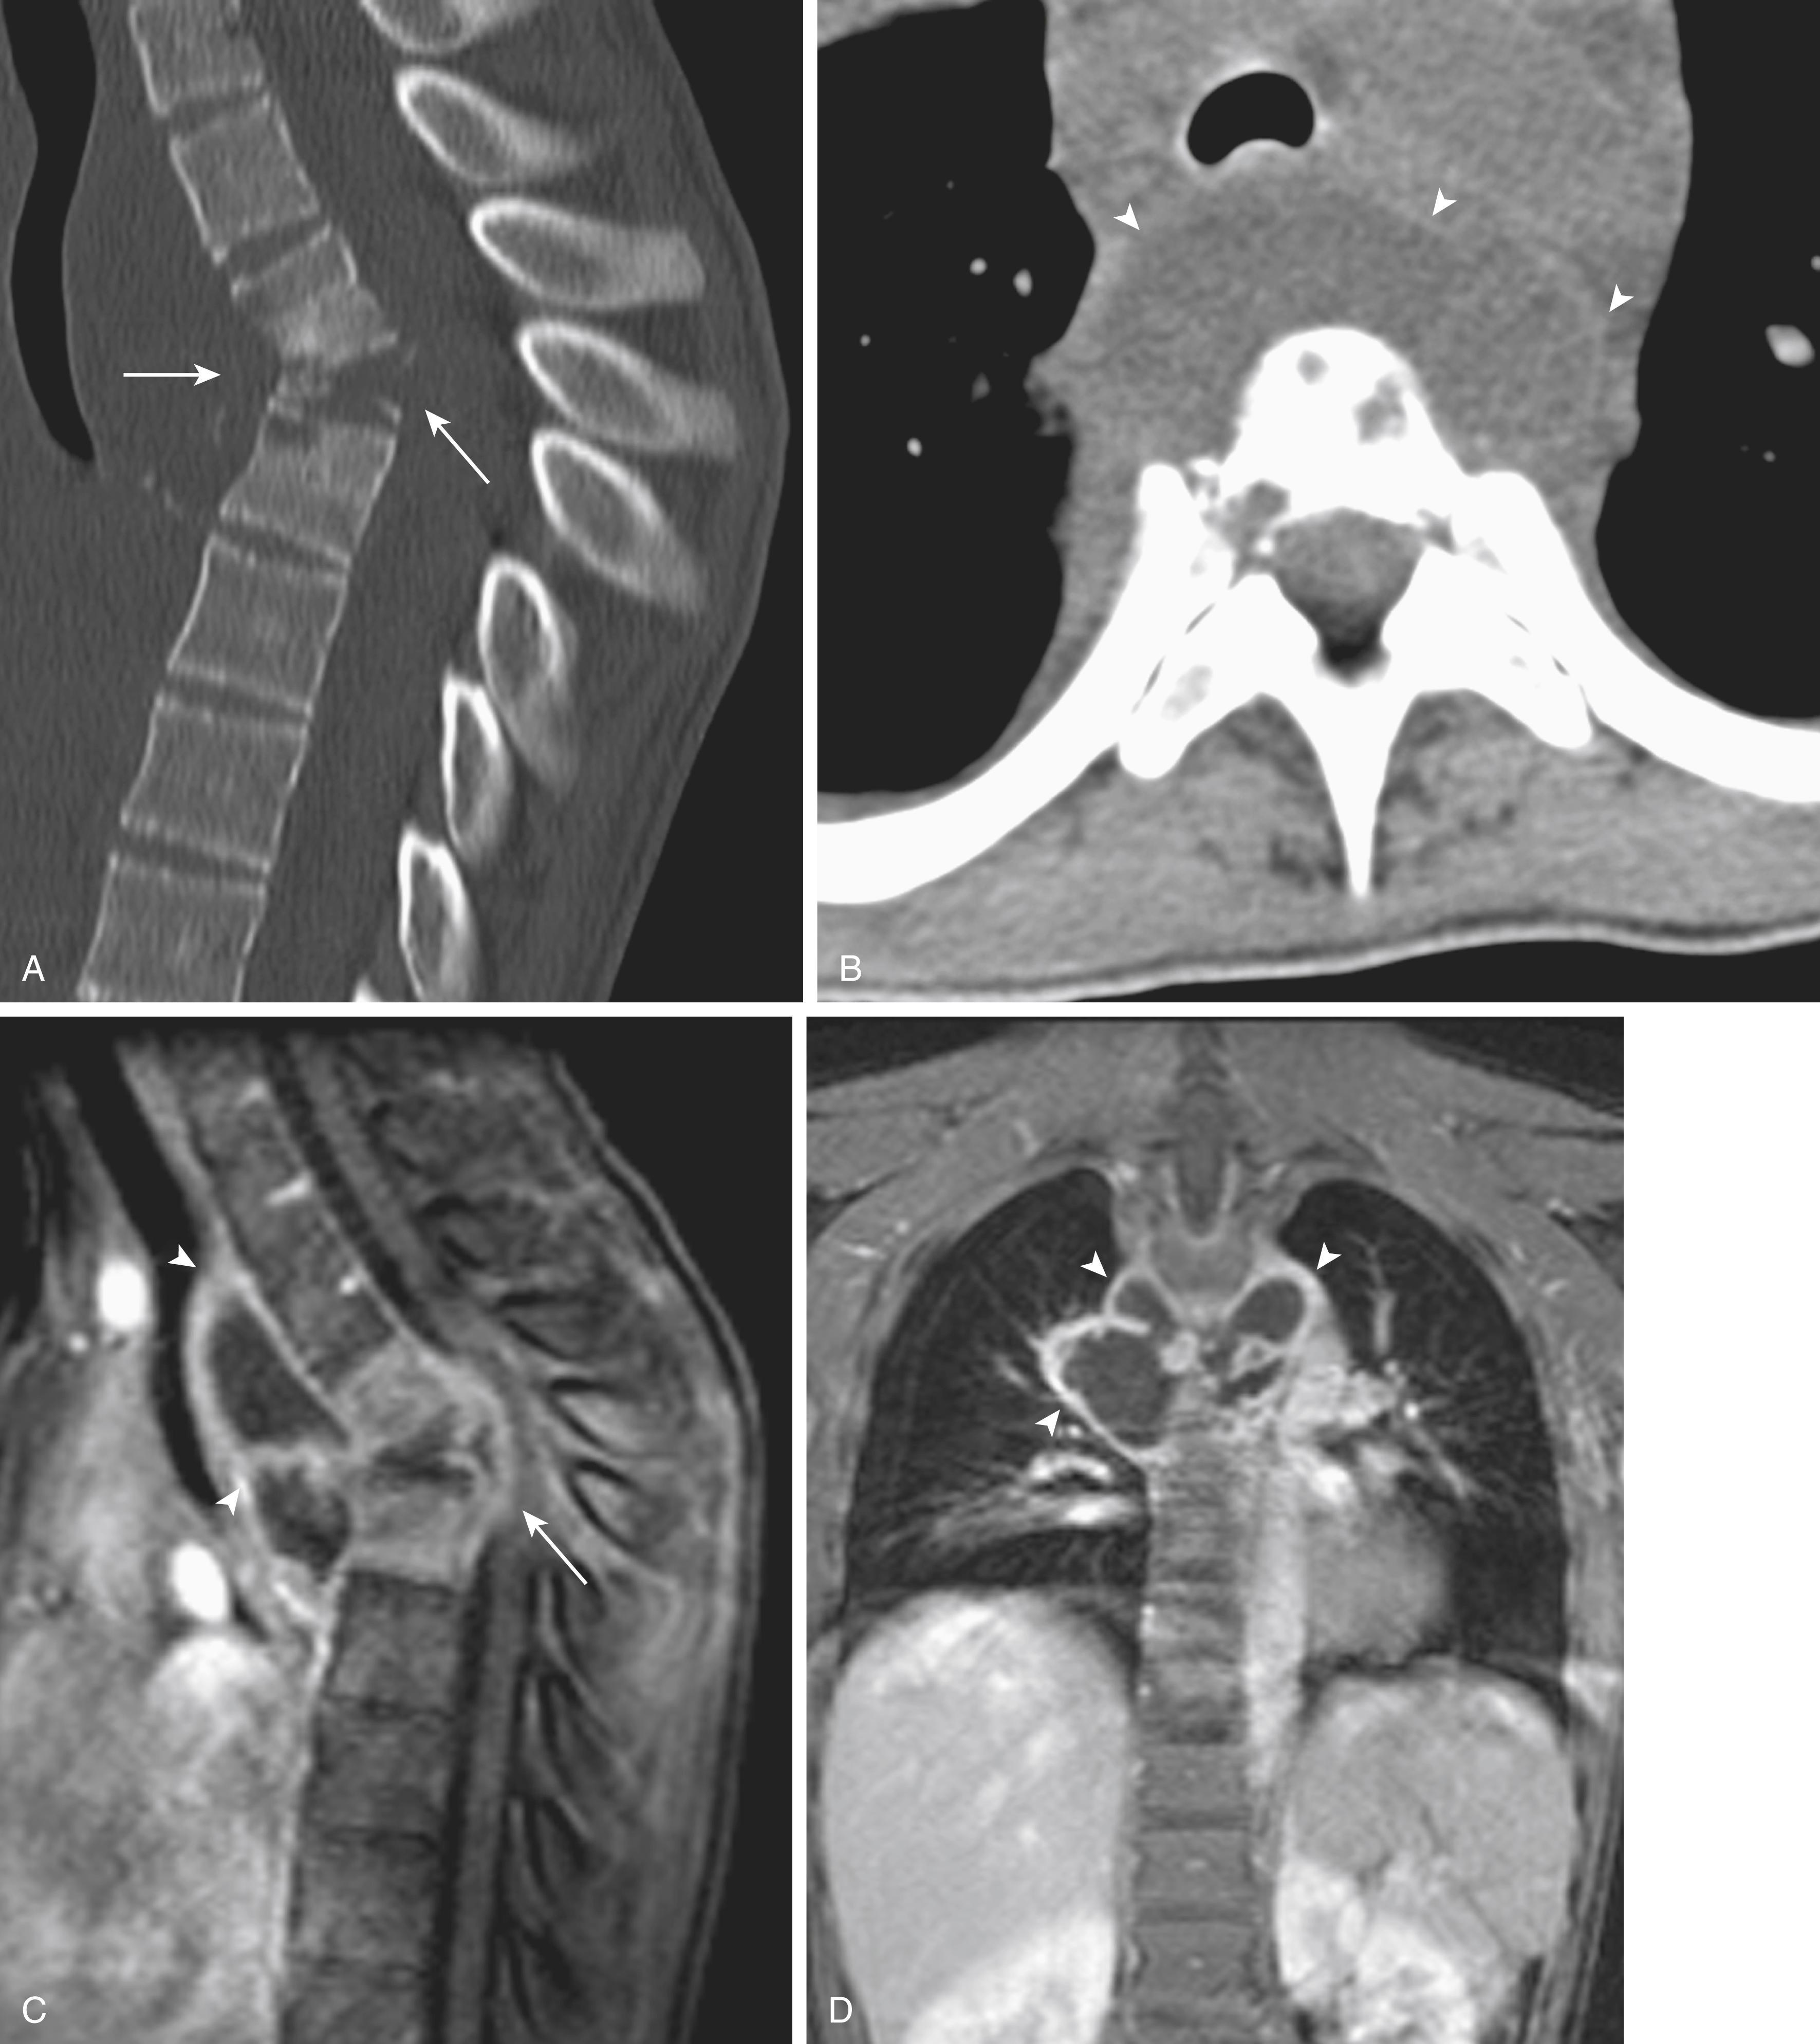 Fig. 46.7, Tuberculous osteomyelitis in a 13-year-old female with progressive loss of strength and coordination in legs. Sagittal reformatted (A) and axial soft tissue window (B) images from a CT of the spine, and sagittal (C) and coronal (D) fat-saturated postcontrast T1-weighted MRI of the thoracic spine demonstrate marked kyphosis at site of bony collapse at the level of the midthoracic spine ( arrows in A and C ), as well as surrounding soft tissue abscess ( arrowheads in B–D ), predominately anteriorly, at the same level.